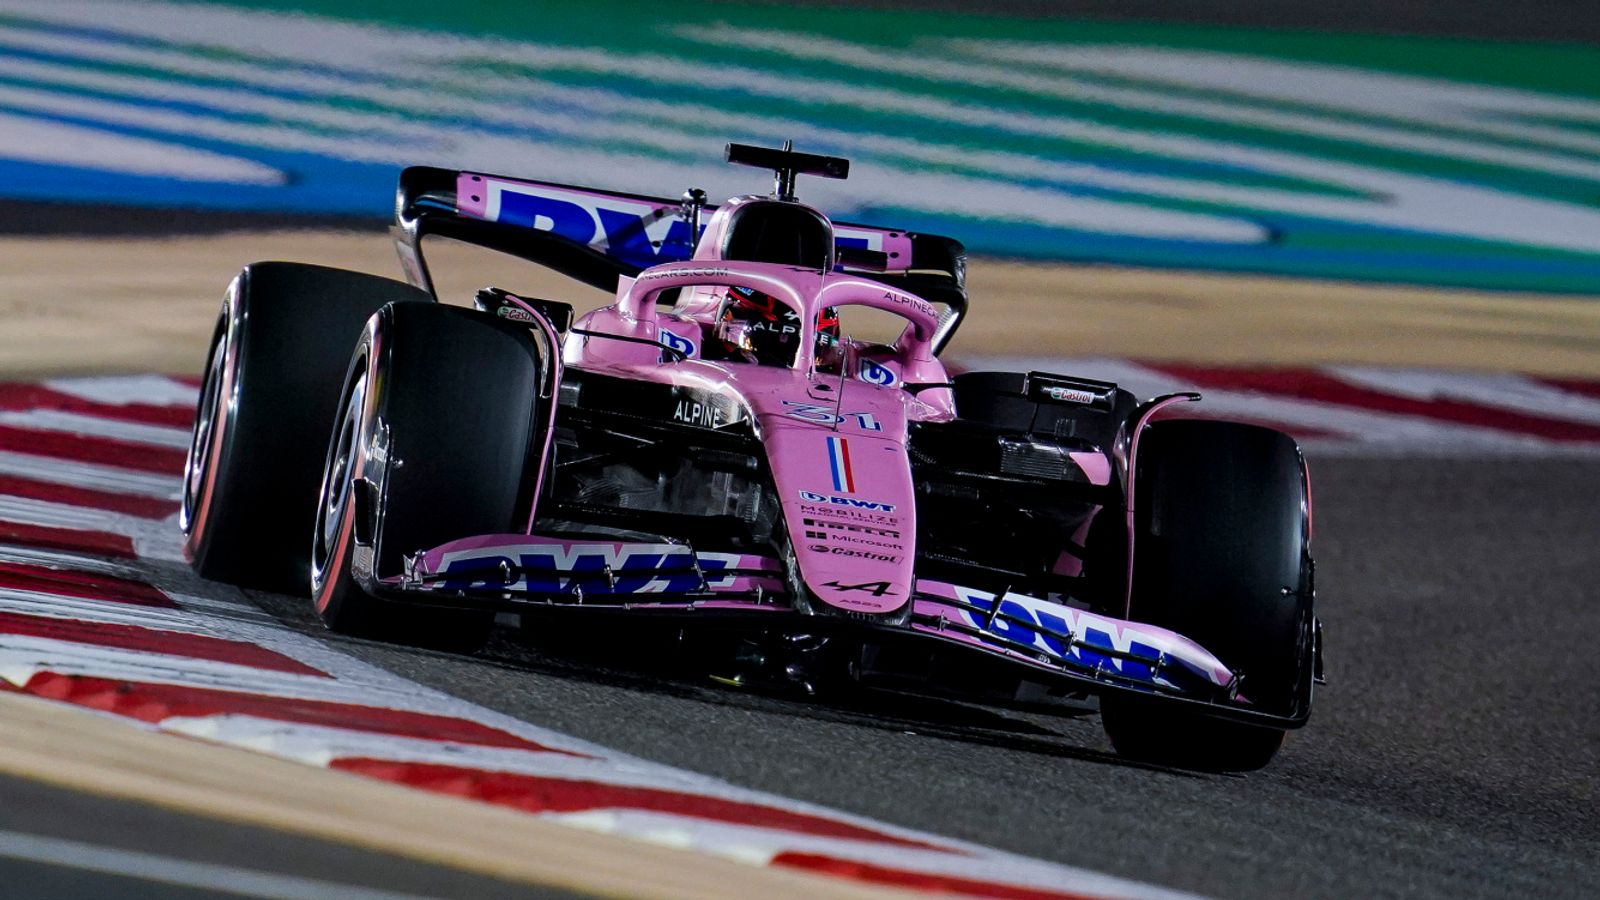 Bahrain Grand Prix: Esteban Ocon equals unwanted record with three driving penalties before retiring